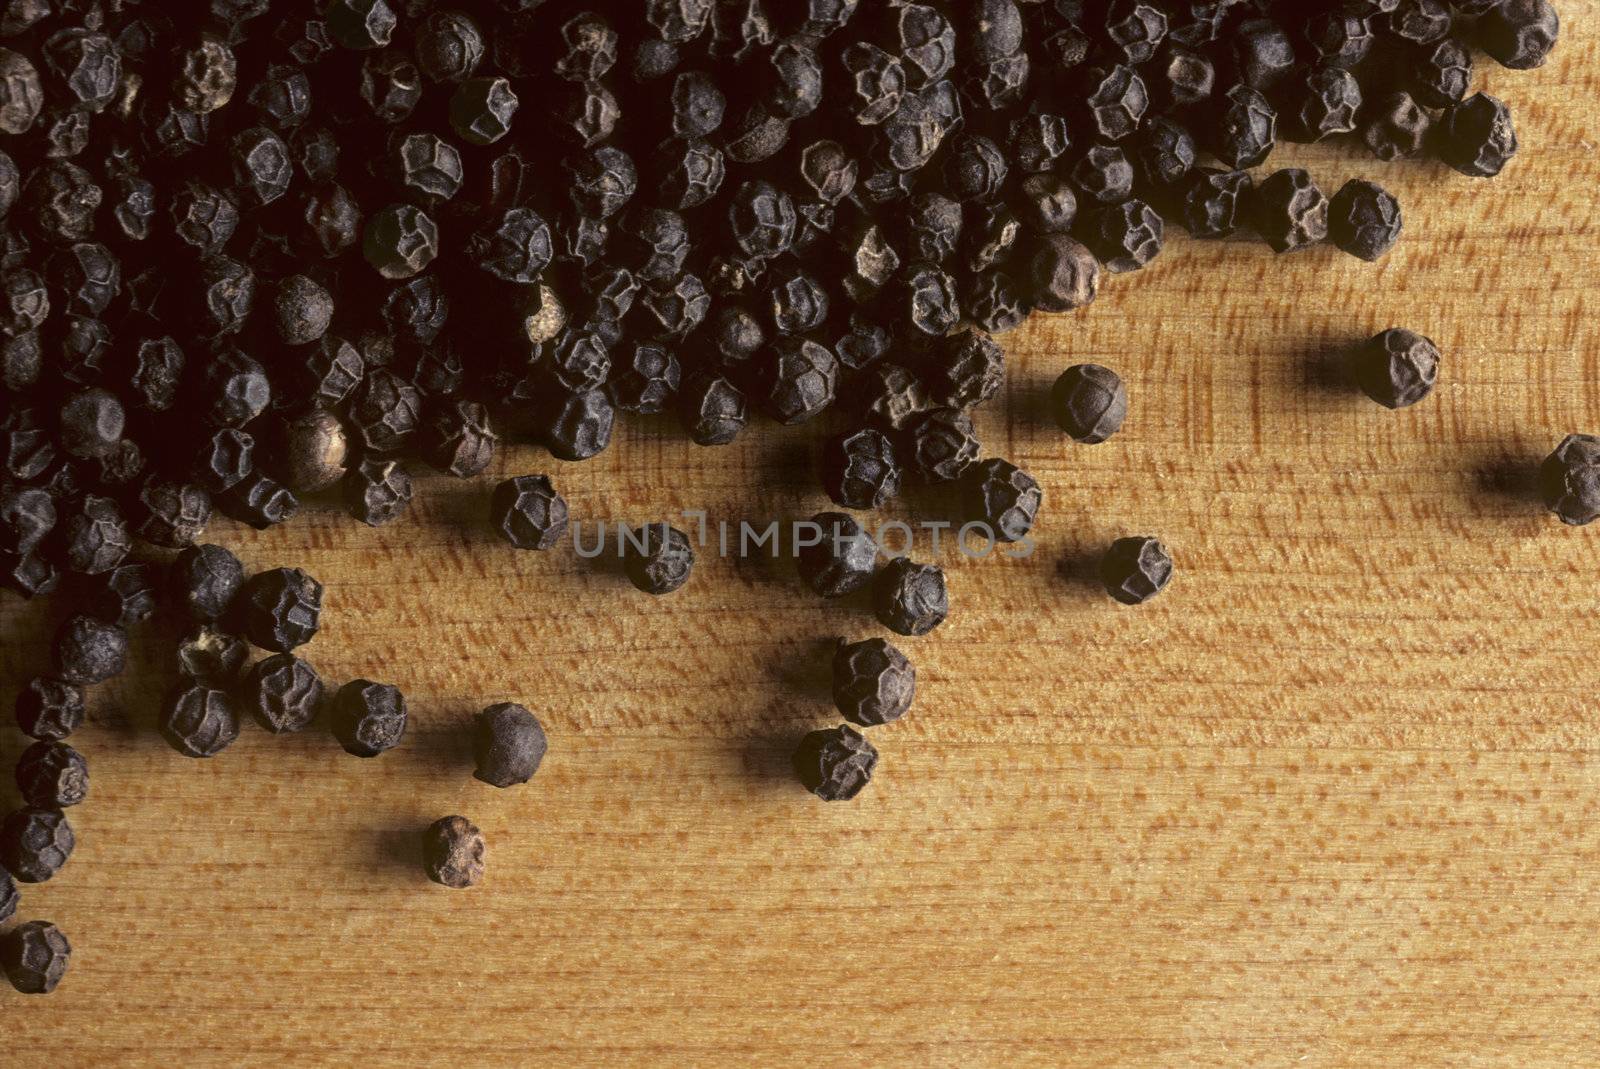 Whole black peppercorns on a wooden butcherblock surface